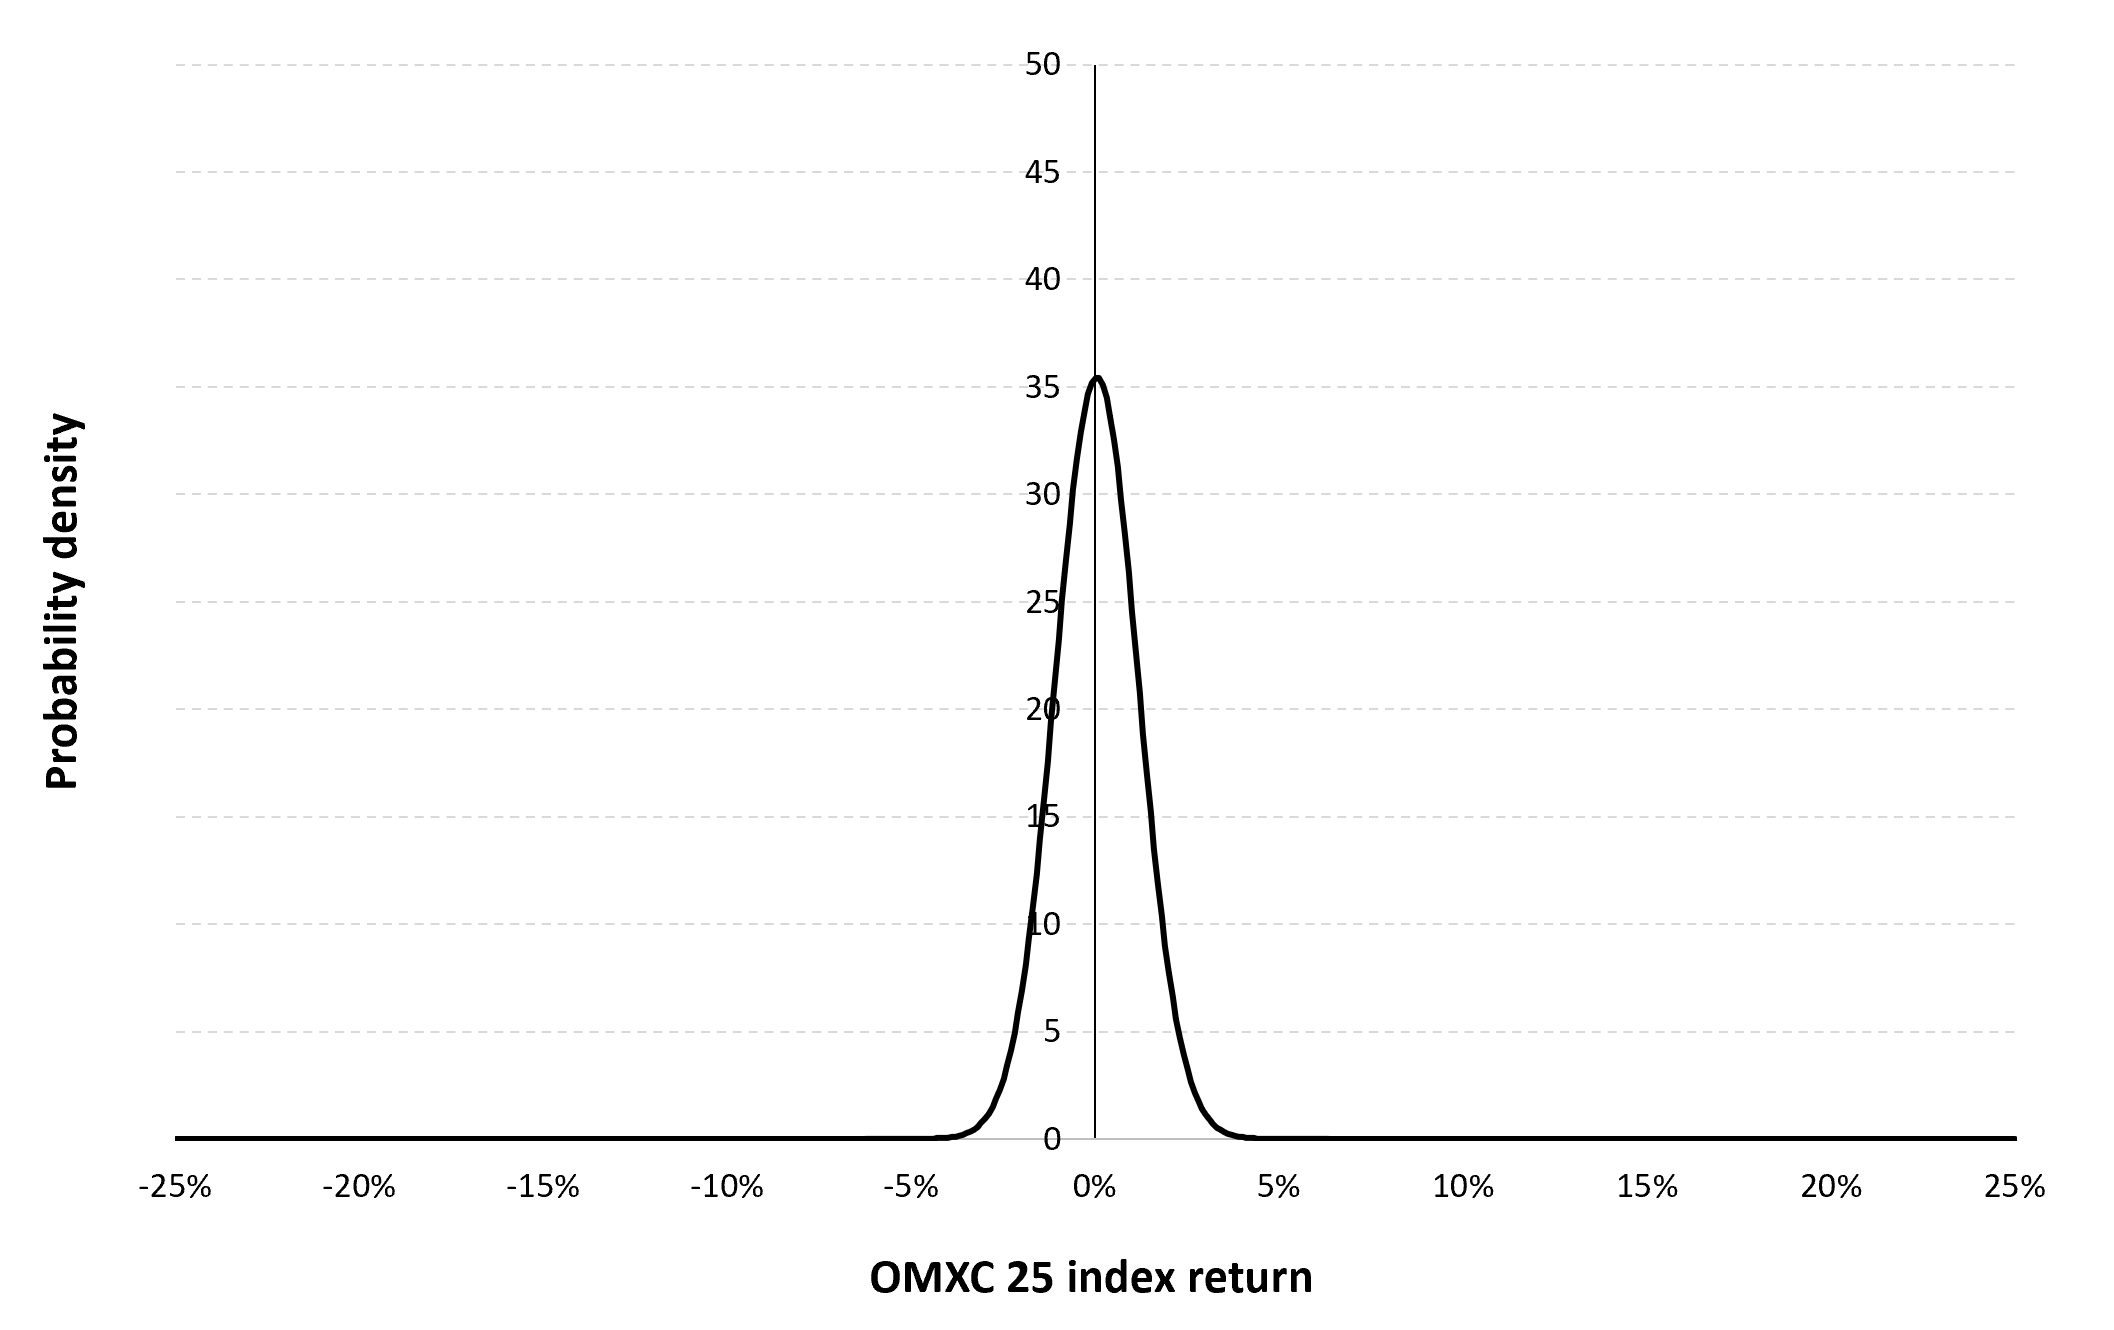 Gaussian distribution of the daily OMXC 25 index returns